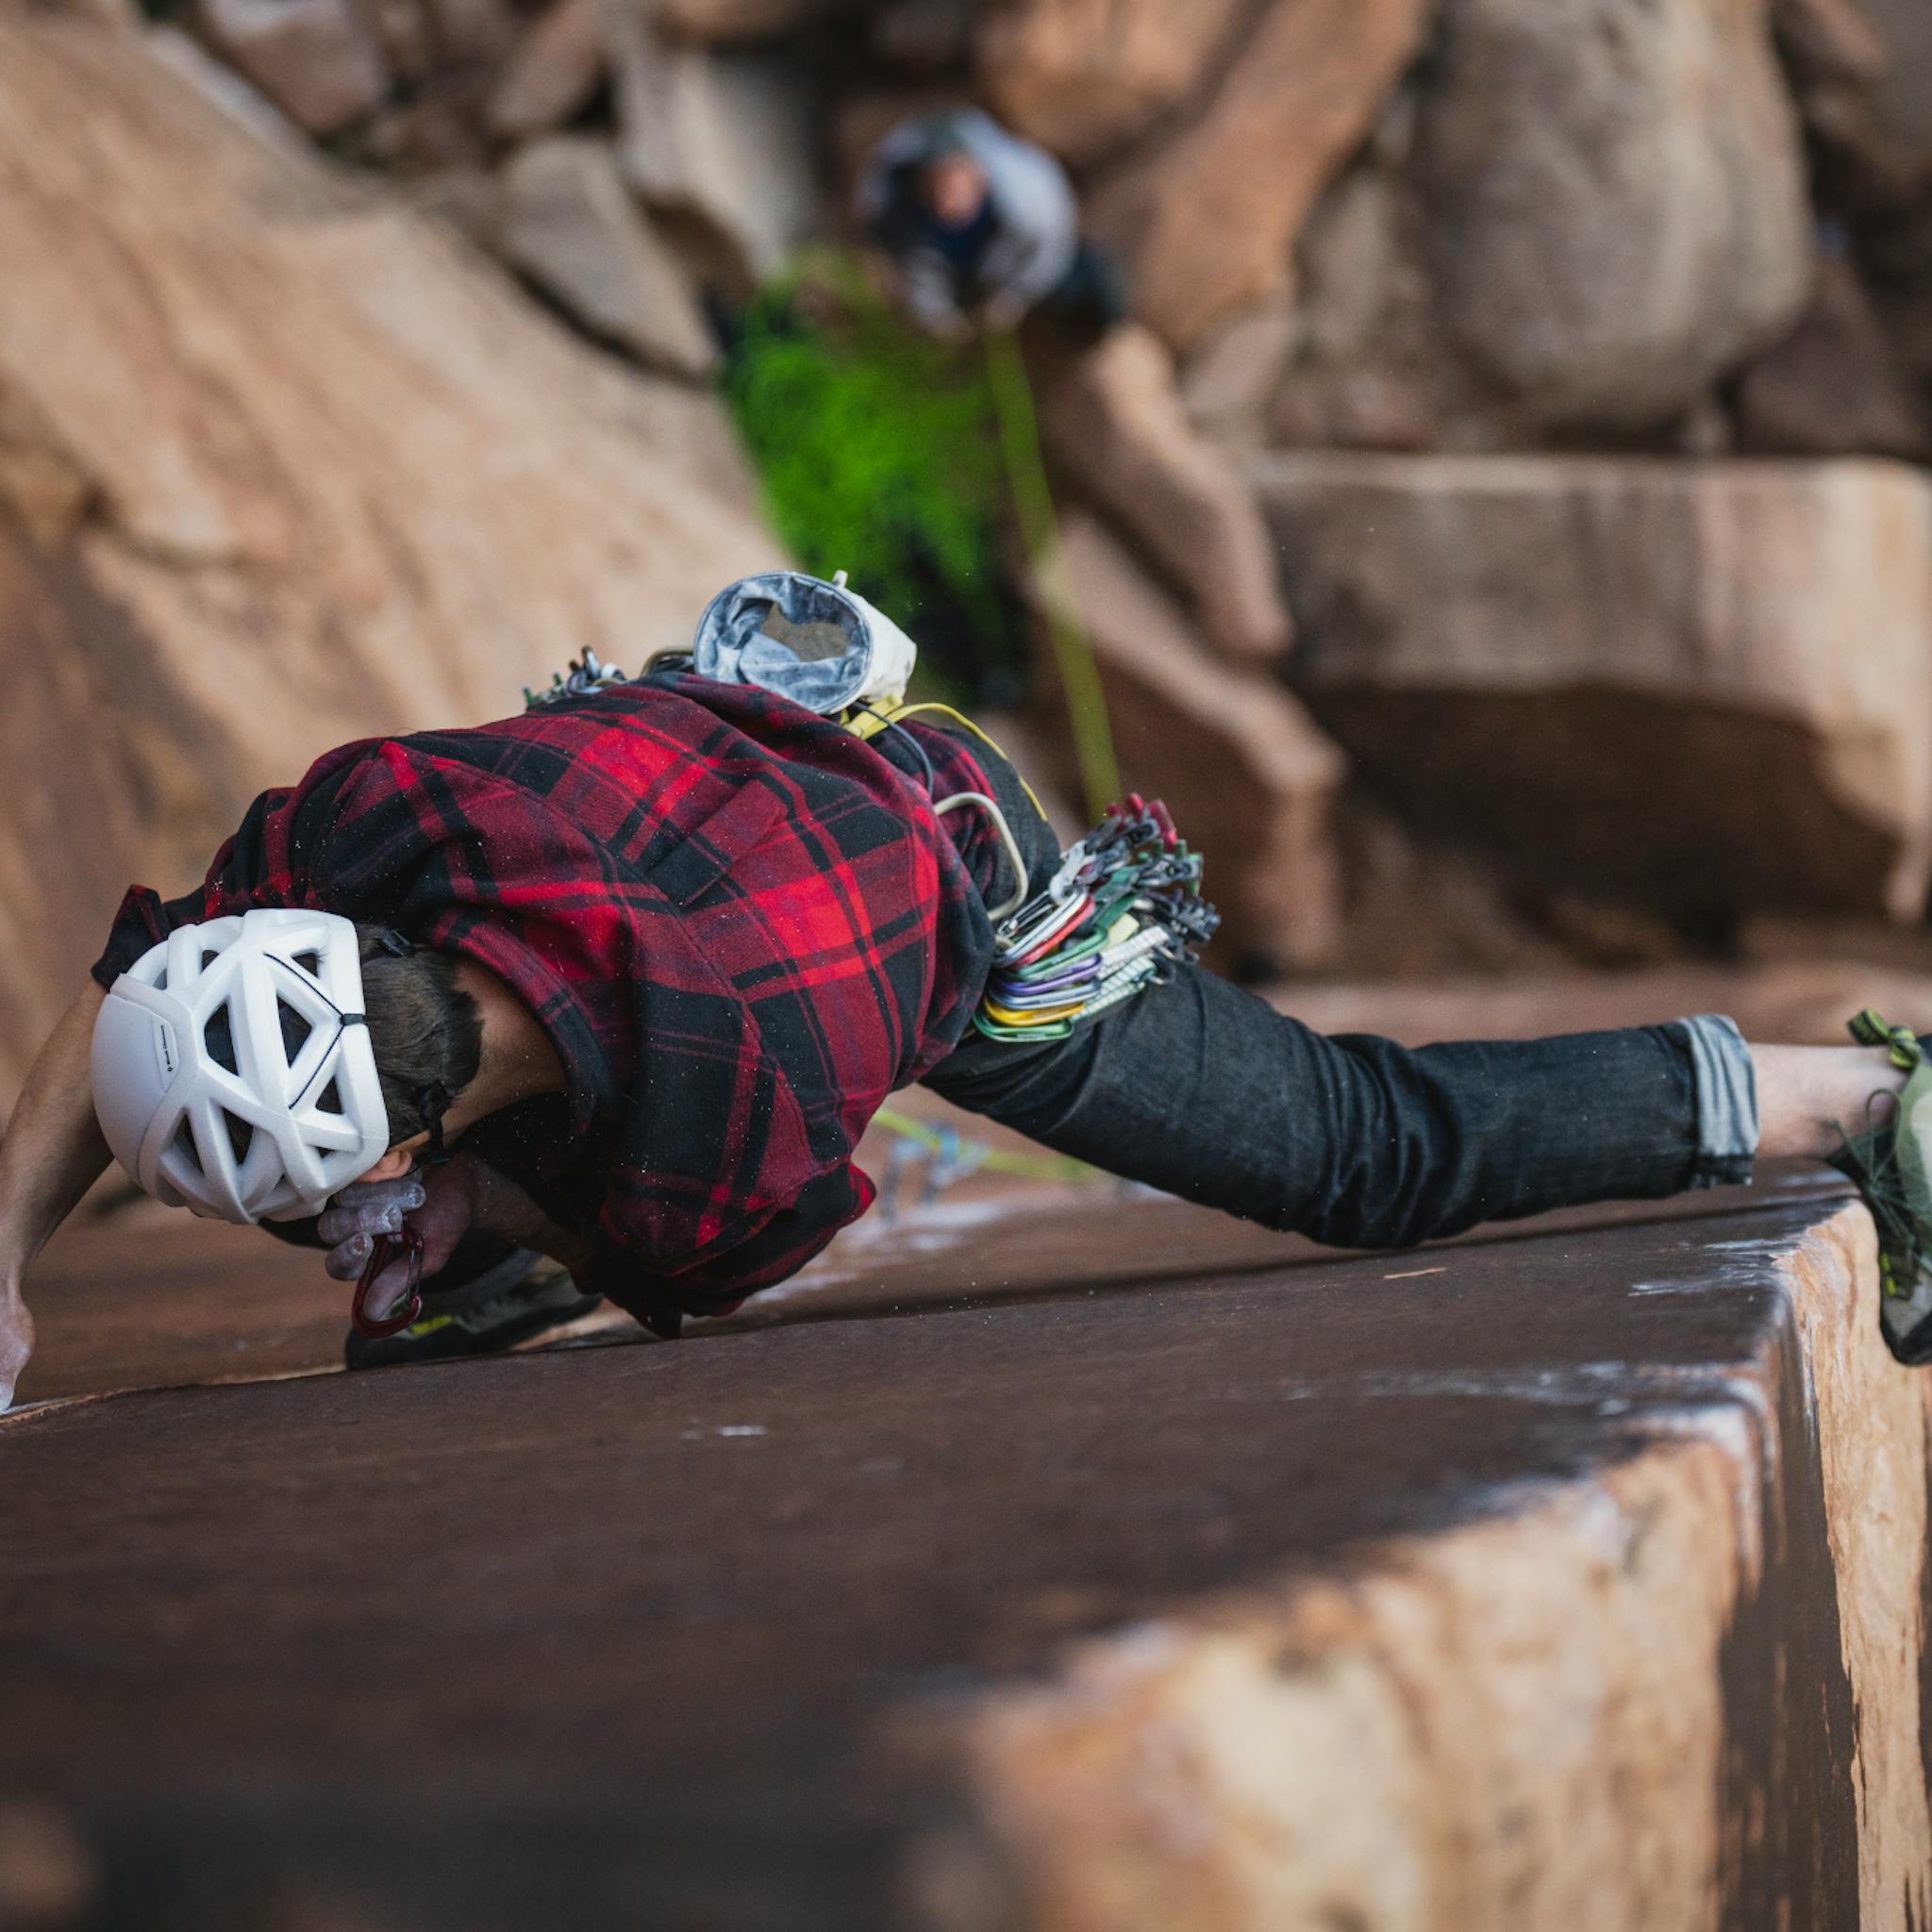 Black Diamond athlete Conor Herson climbing in the Forged Denim Pants.